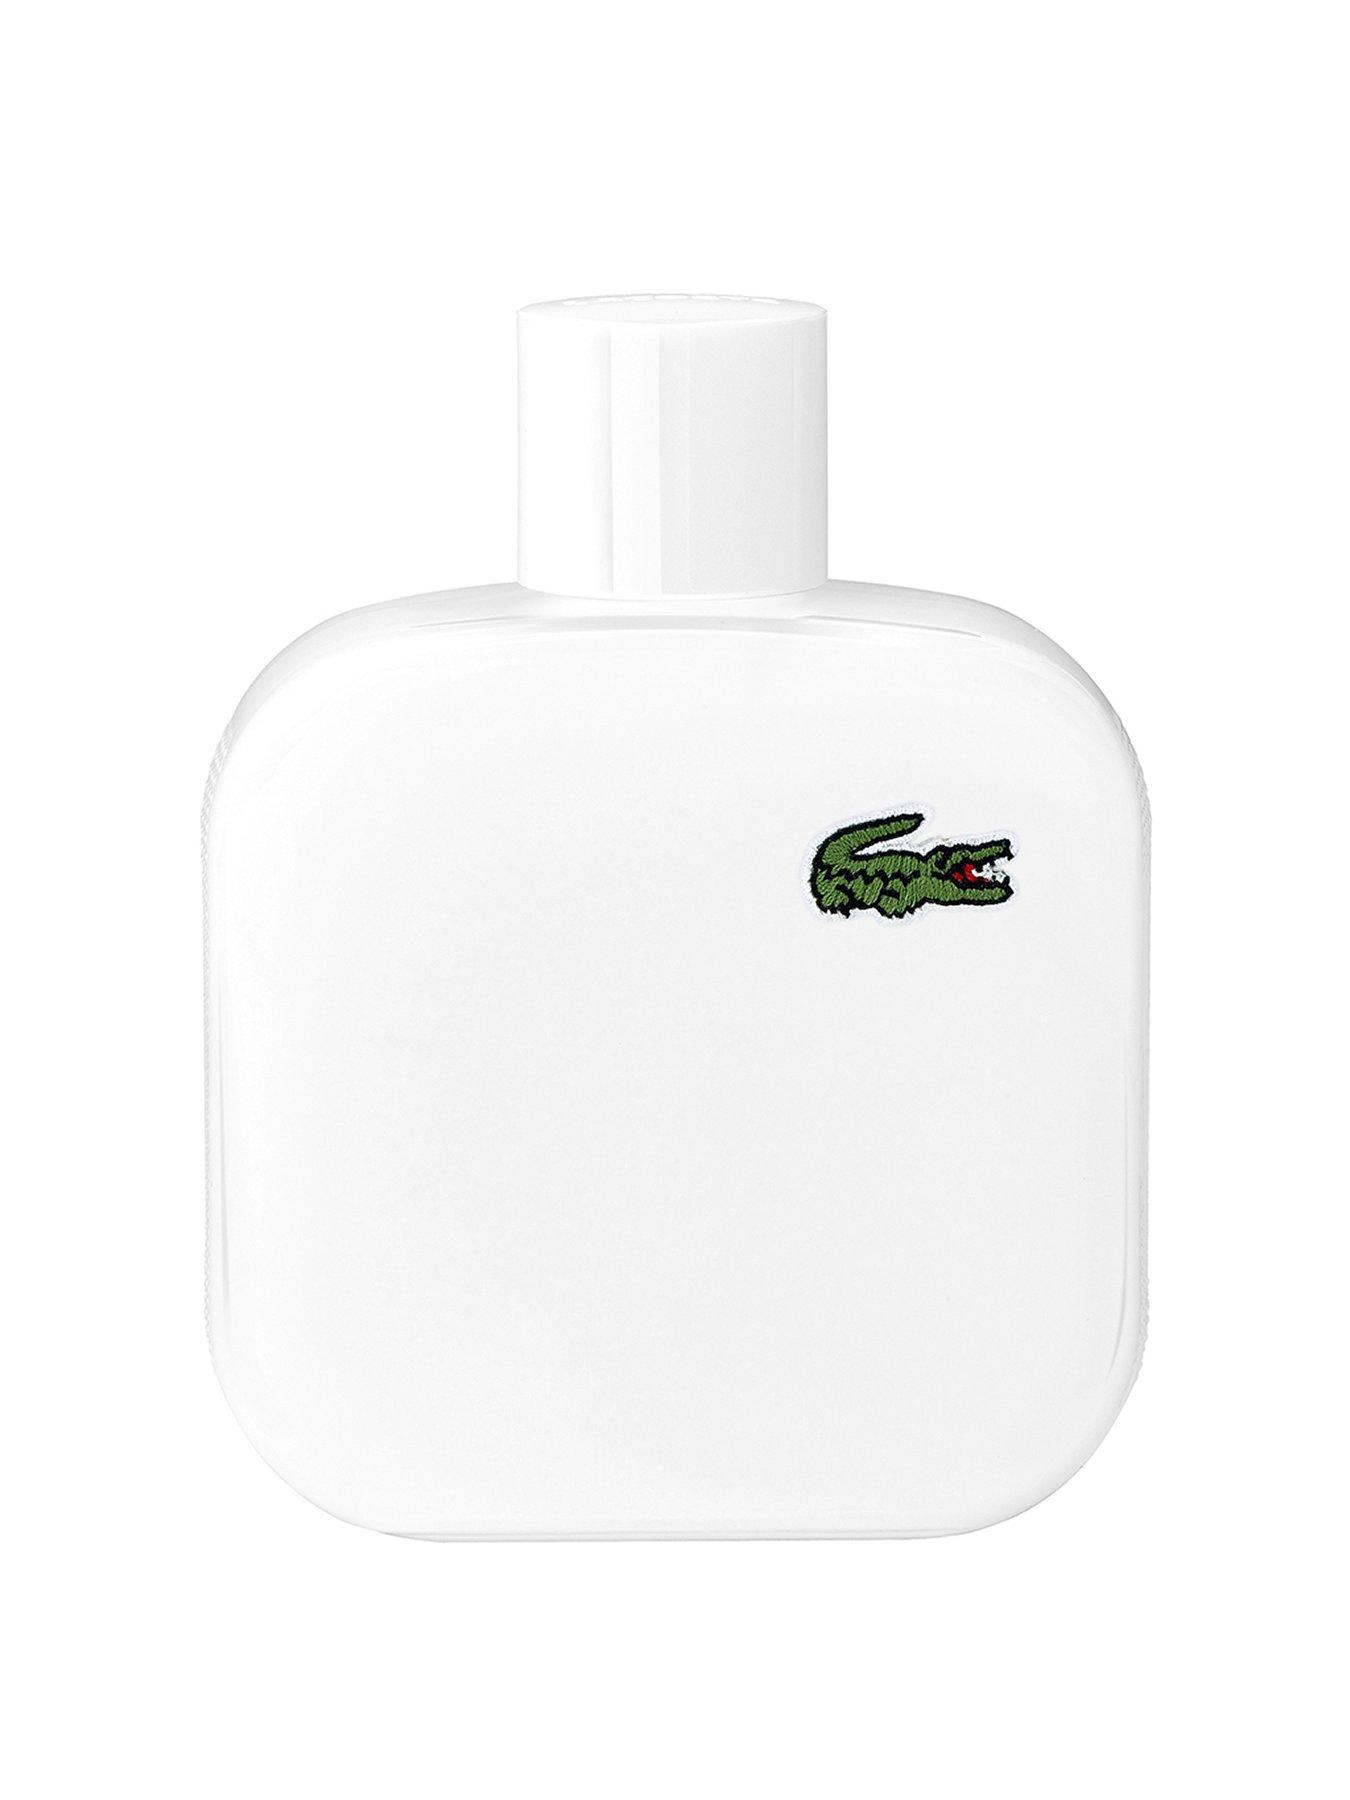 lacoste live aftershave 100ml